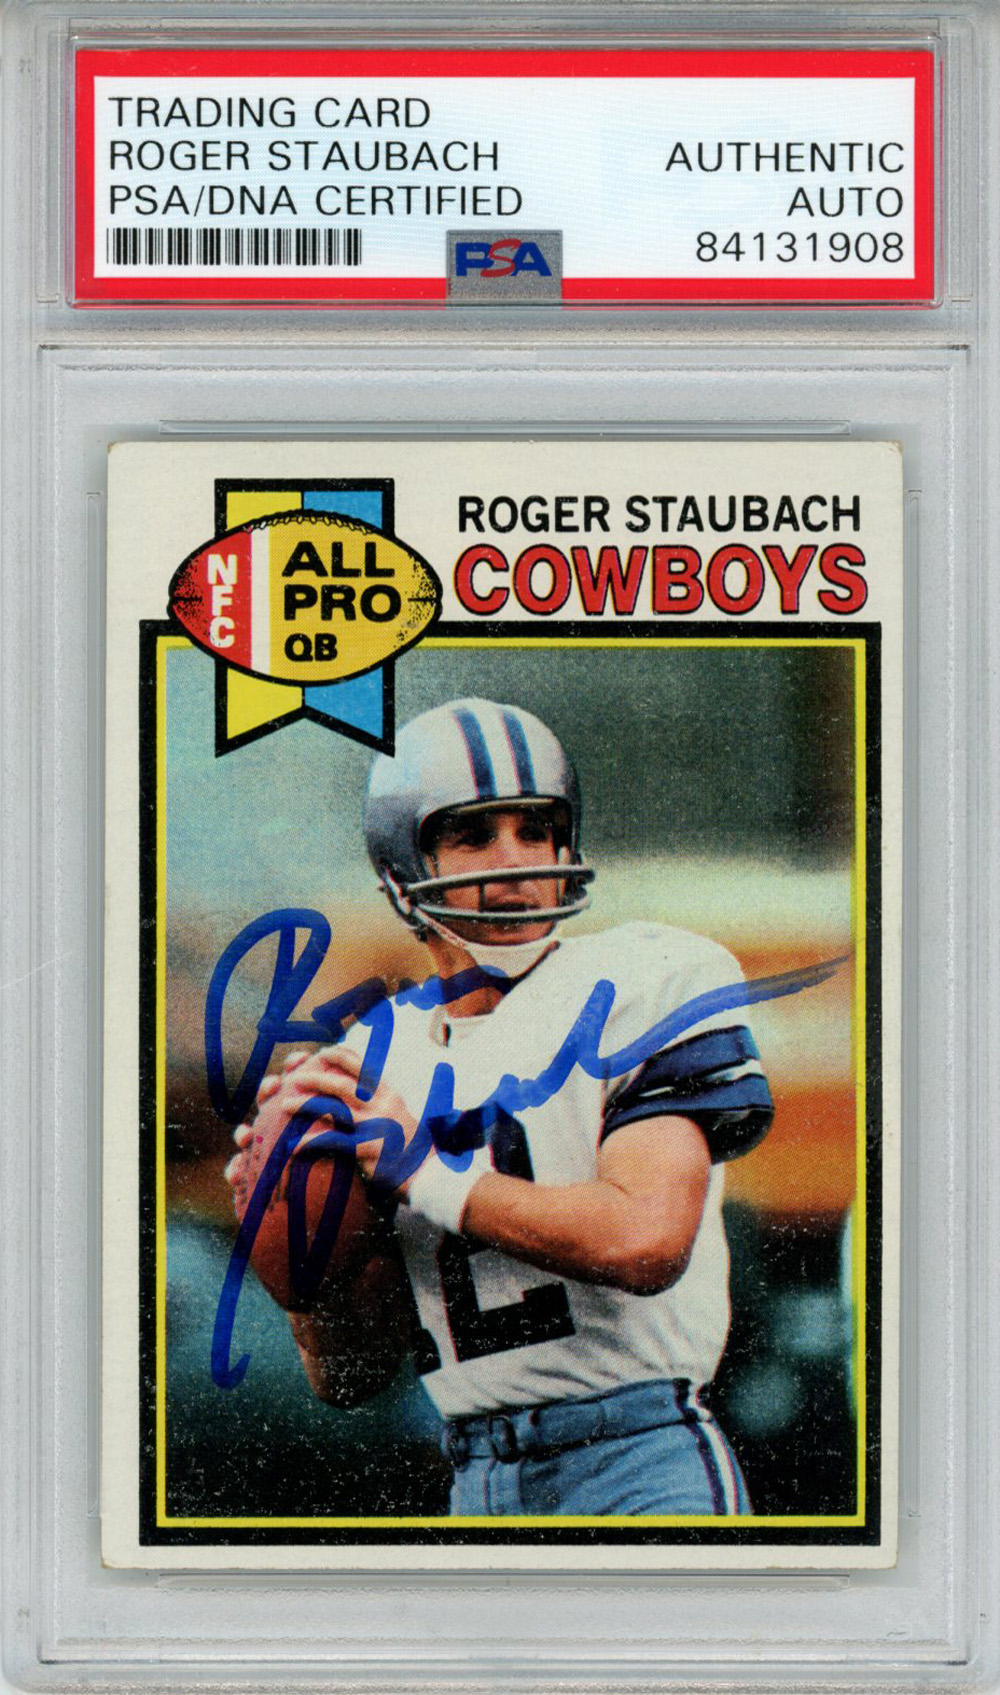 Roger Staubach Autographed 1979 Topps #400 Trading Card PSA Slab